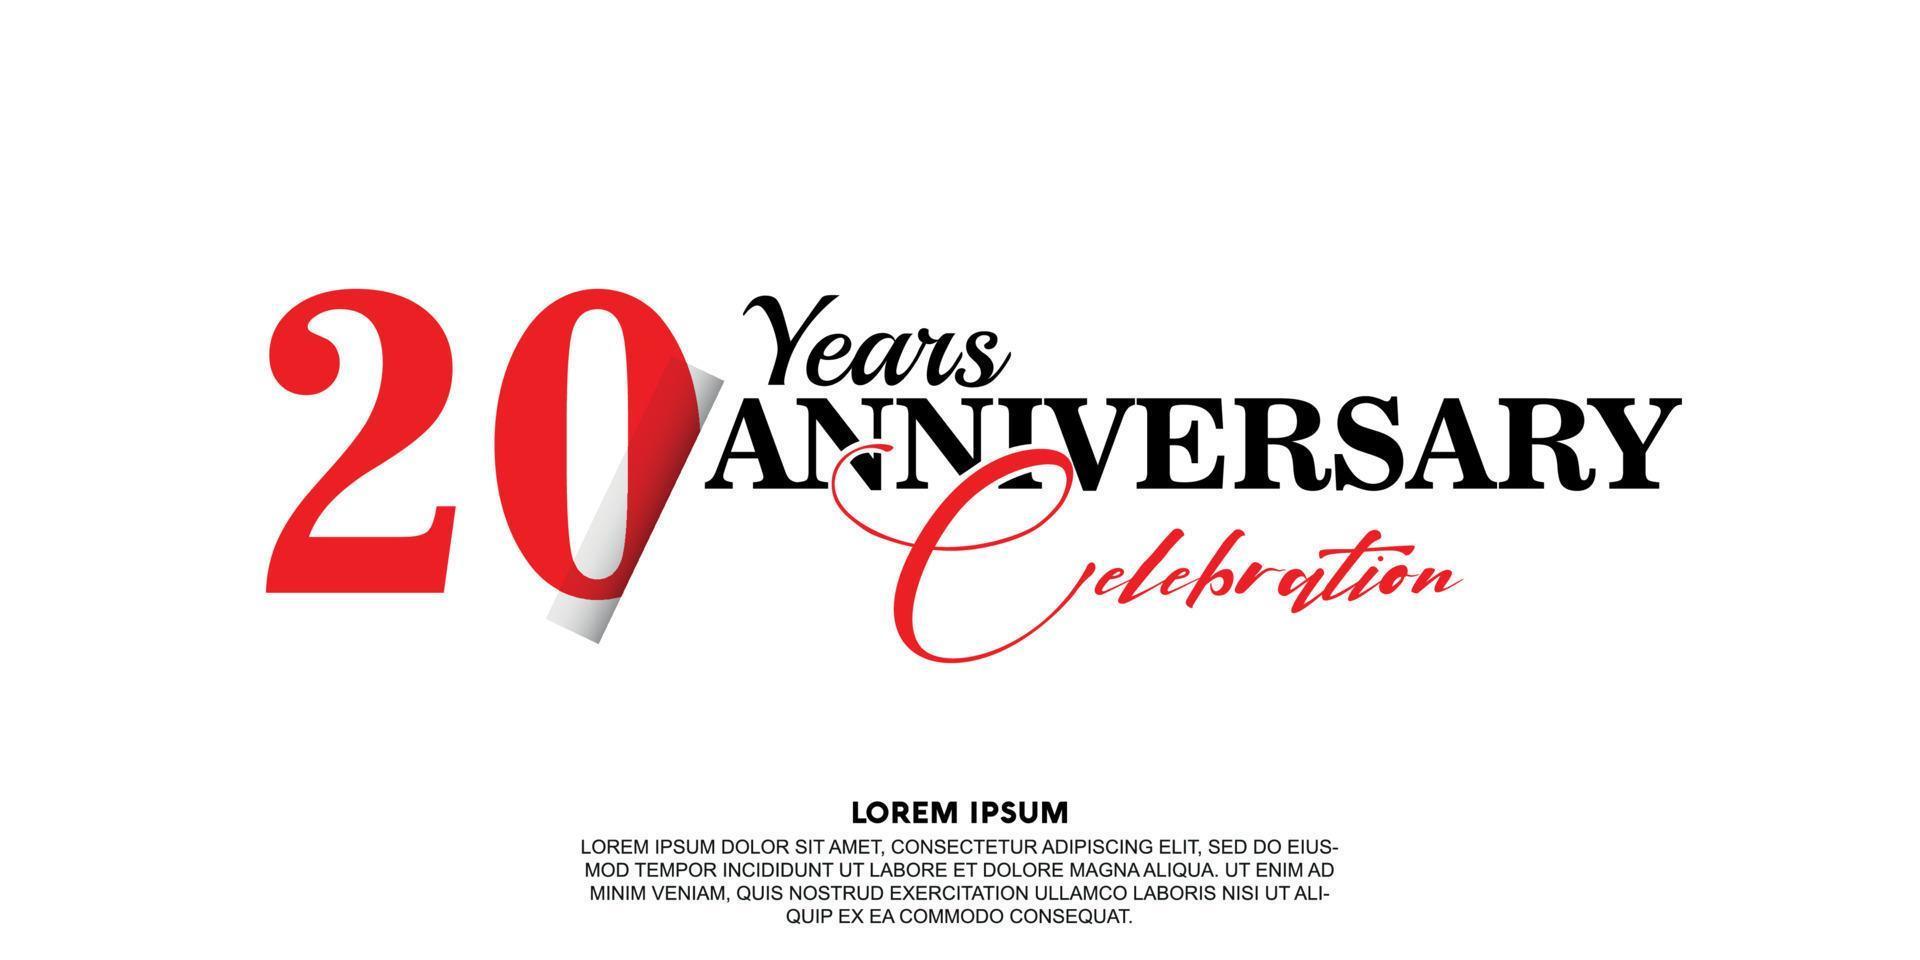 20 year anniversary celebration logo vector design with red and black color on white background abstract